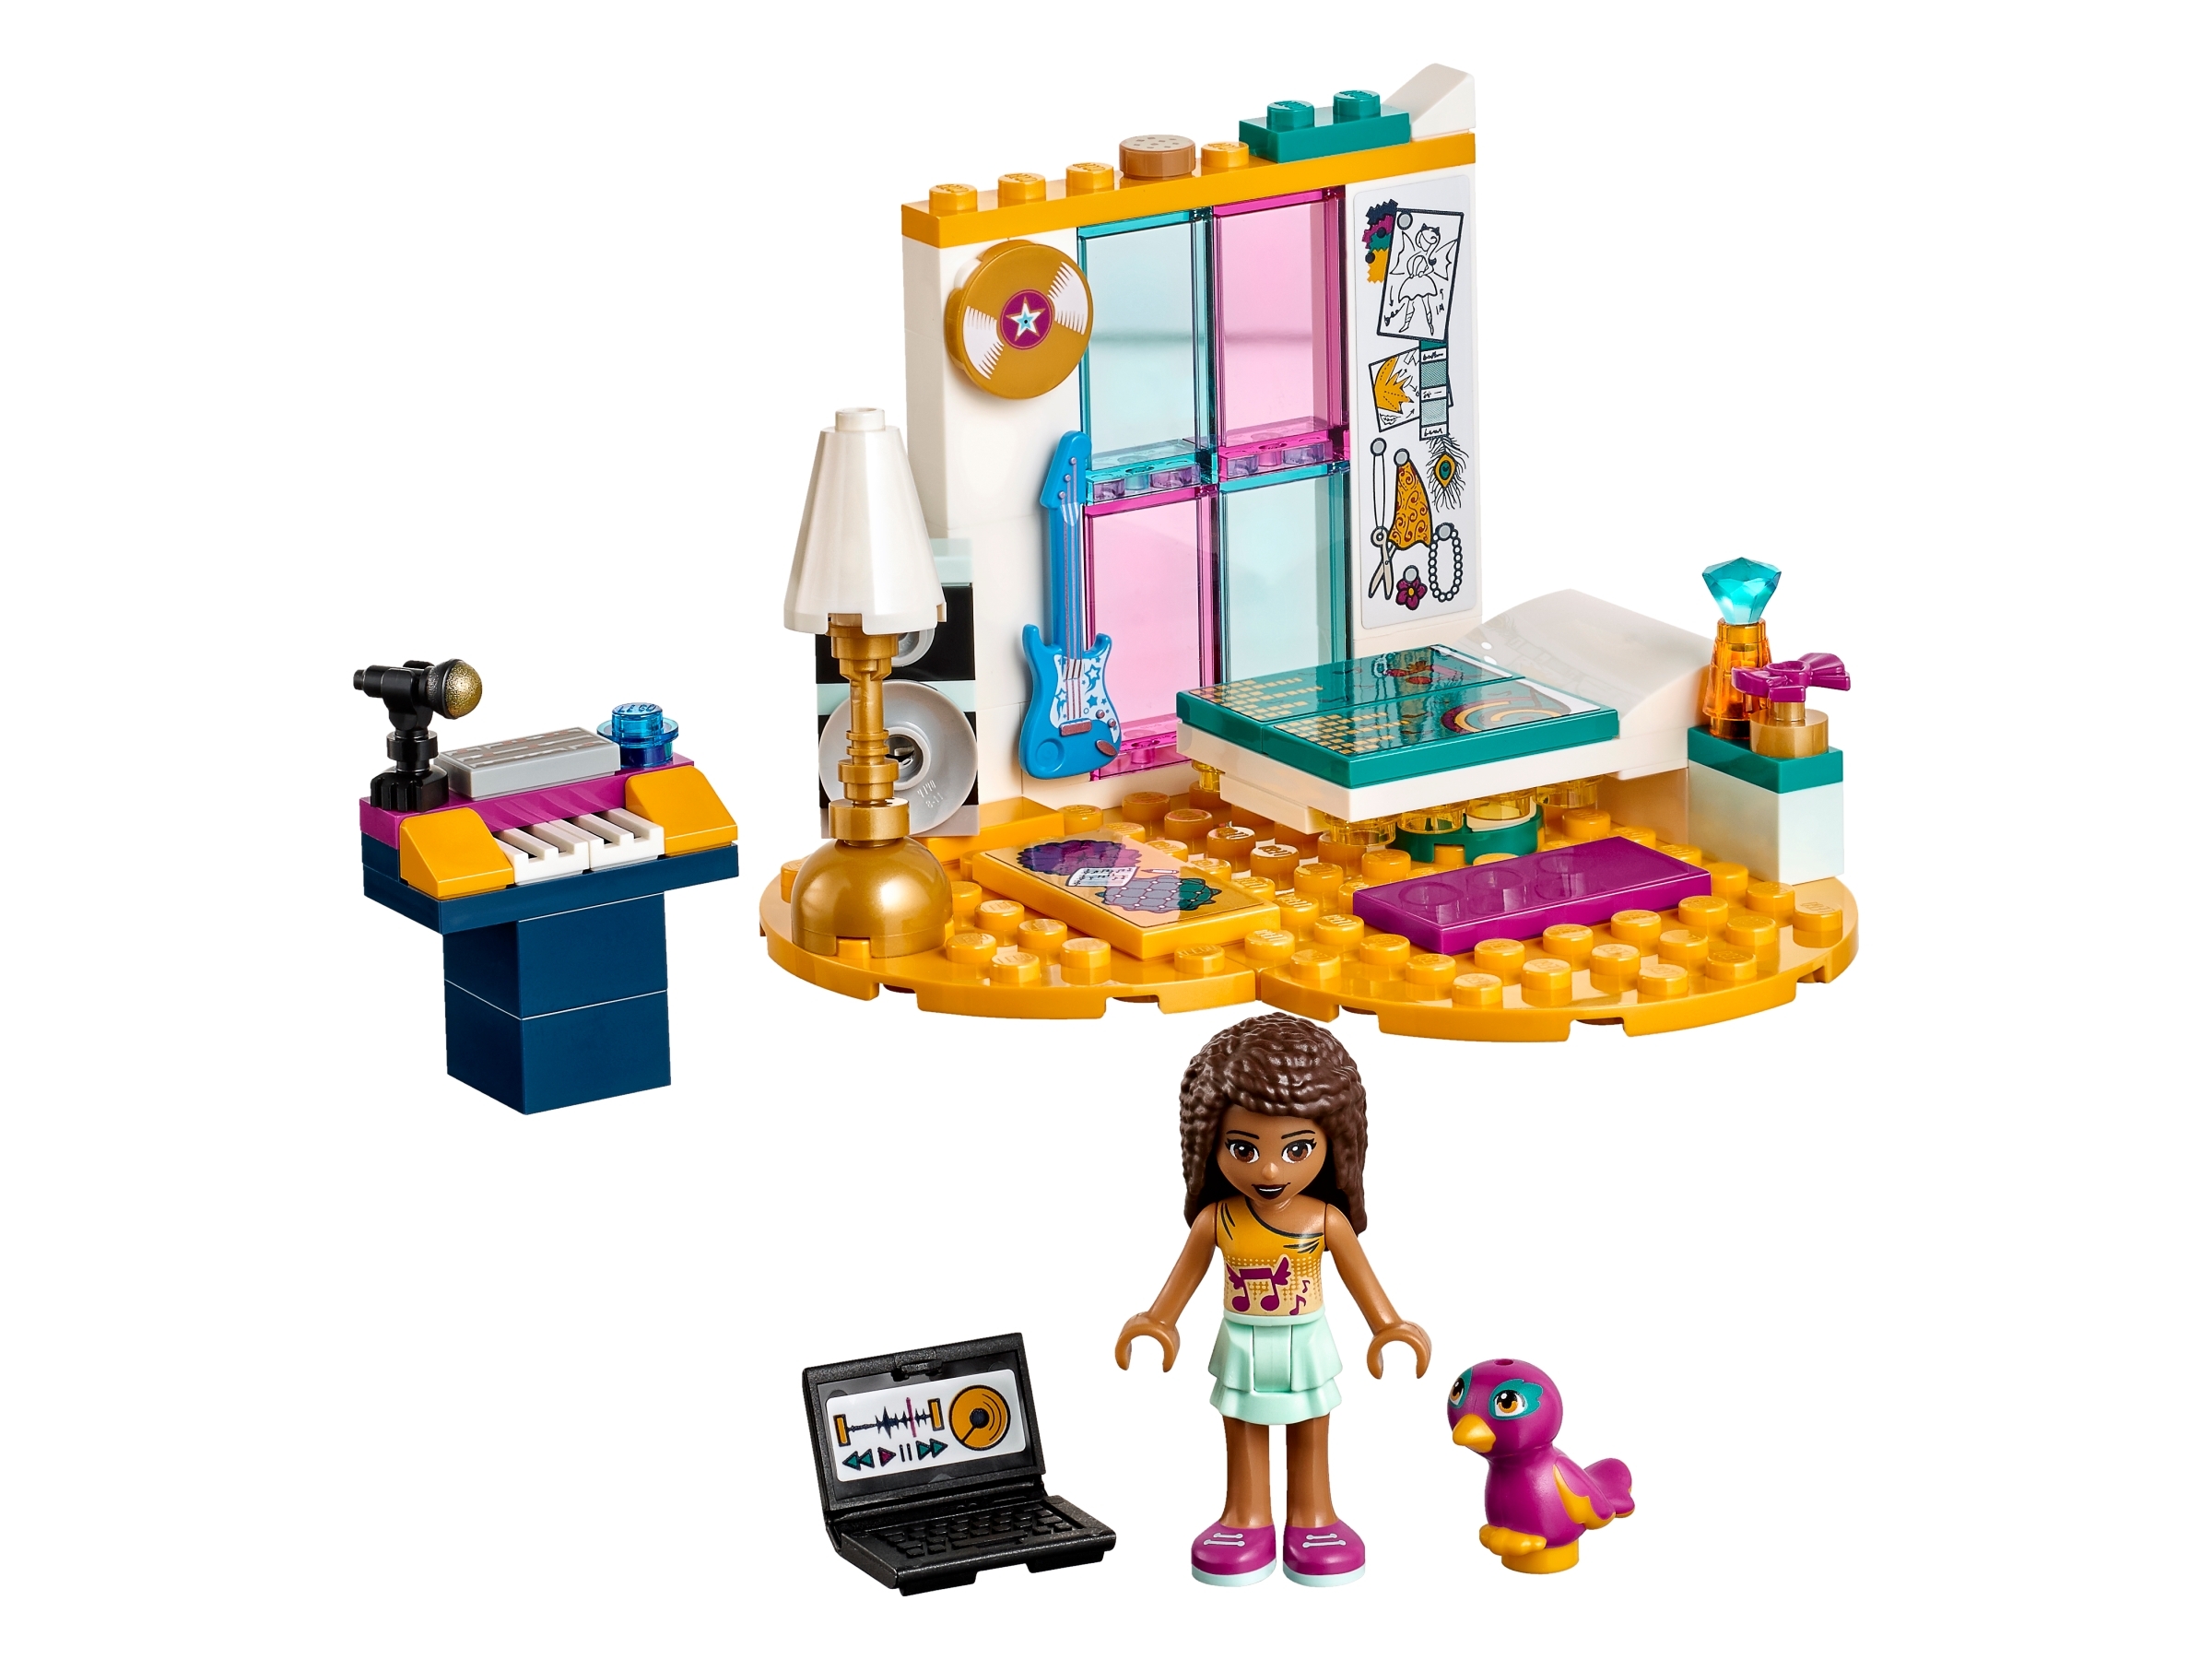 Andrea's Bedroom 41341 | Friends | Buy online at the Official LEGO® Shop US